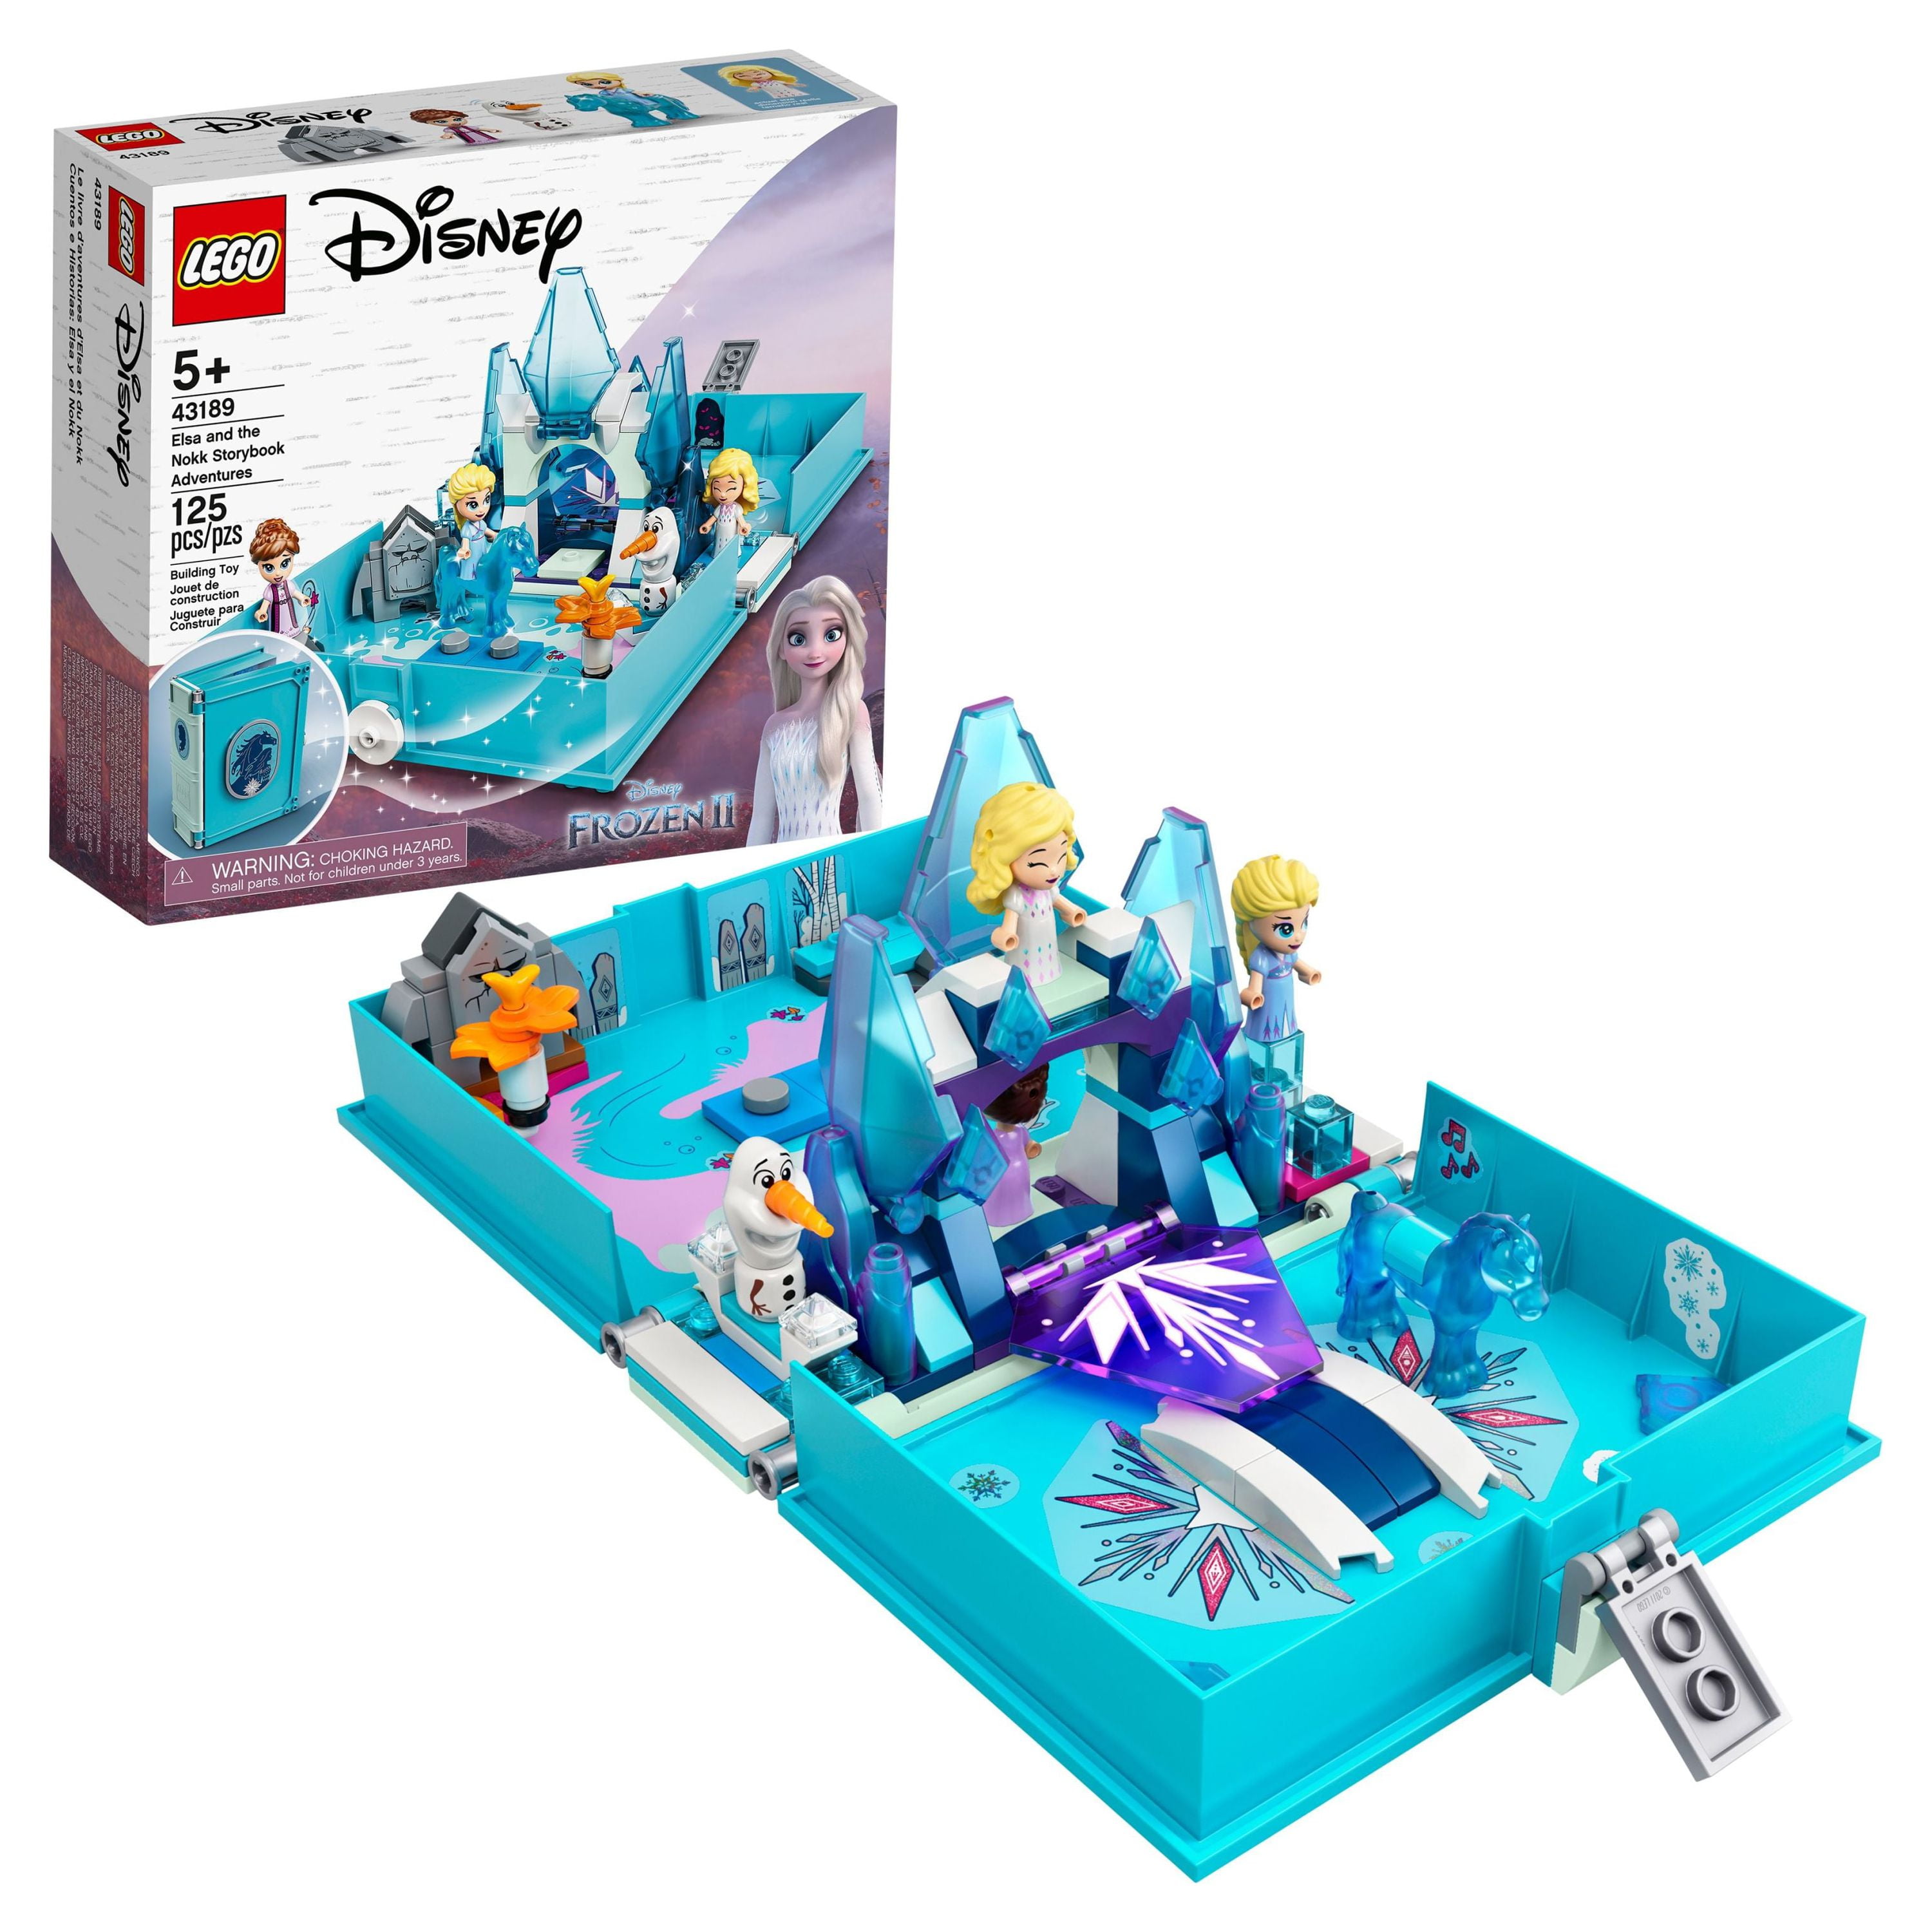 Kids, Adventures Elsa and Toy for Plus with Doll 2 Playset 43189, LEGO Year for 5 Perfect Storybook the Princess Old Disney Boys & Nokk Girls Disney Travel, Frozen Micro Gifts